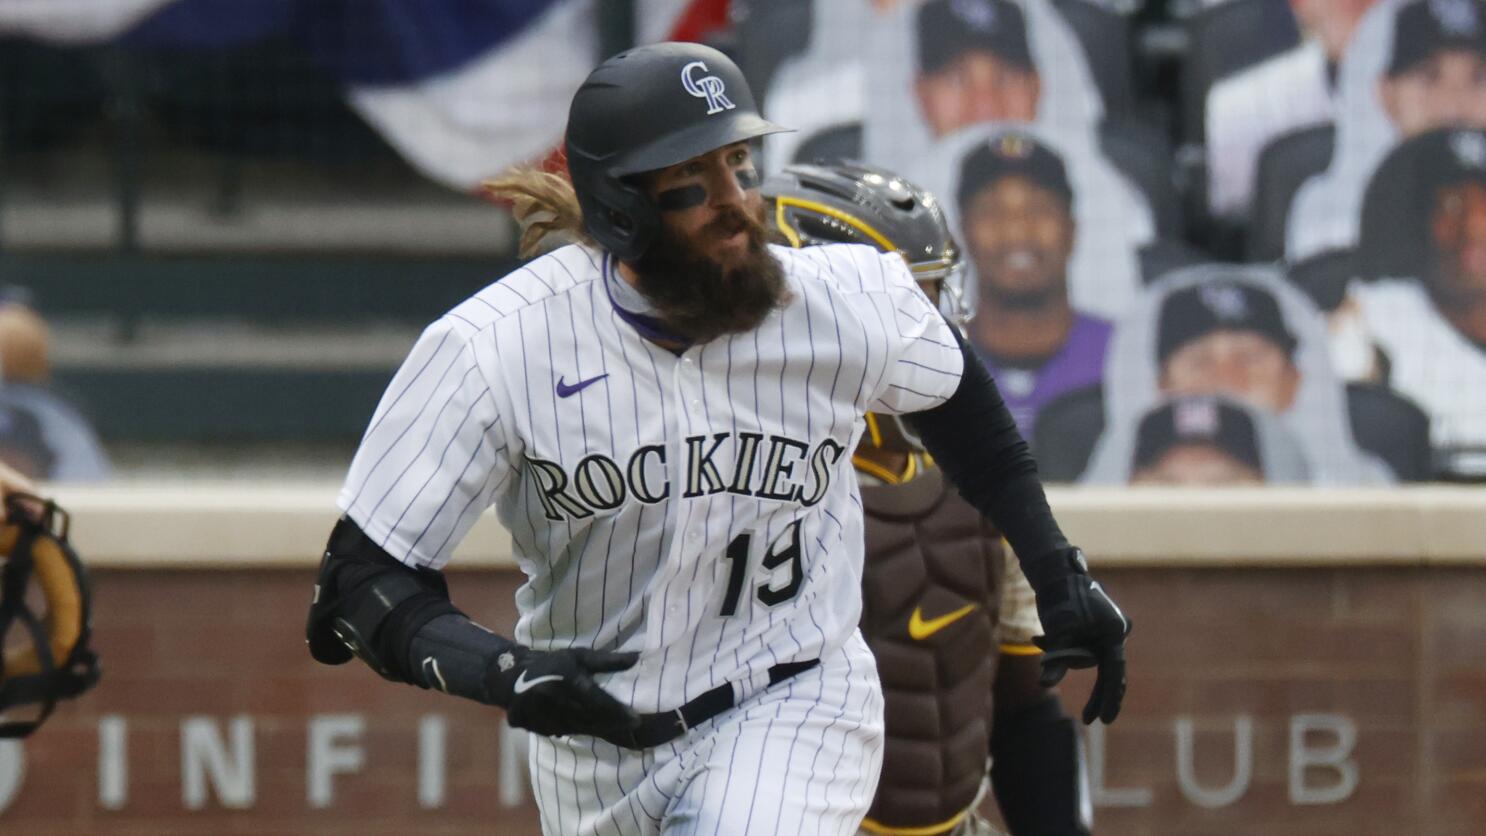 Rockies Charlie Blackmon. One of the players in the Majors who has